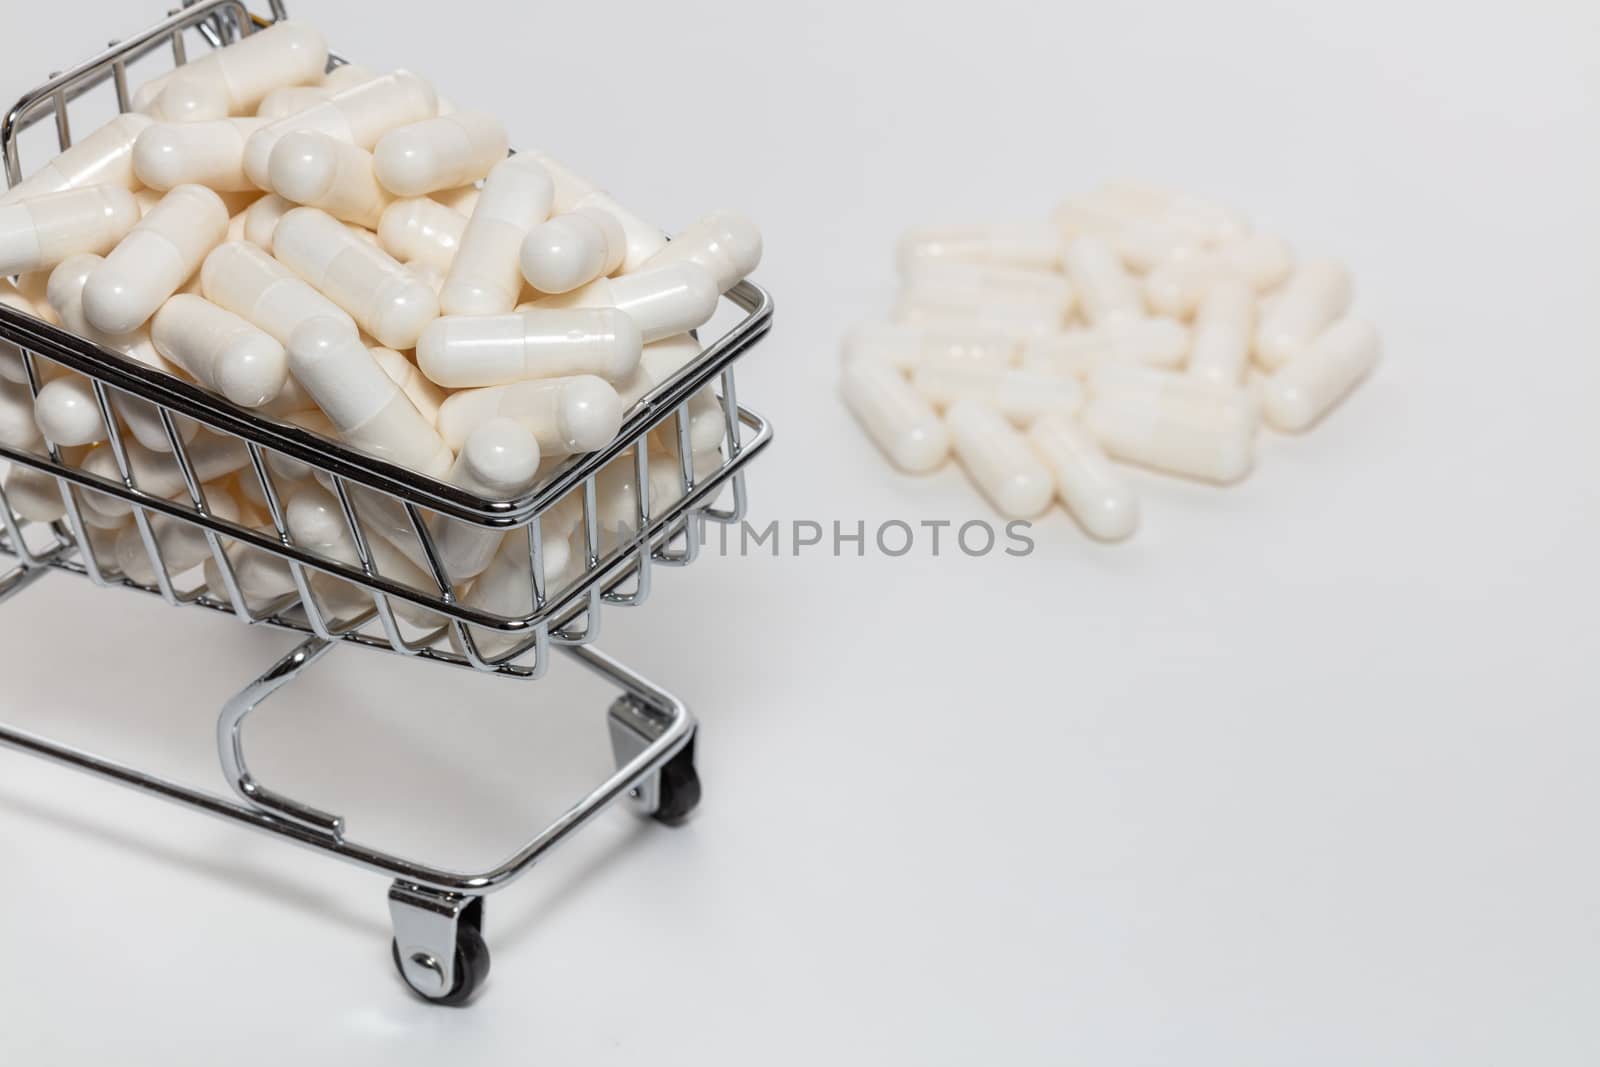 High angle shot of small shopping cart full of white pills. Bunch of pills blurry in the background. White background, close up shot. Shopping online, buying medicine, pharmaceutical business concepts